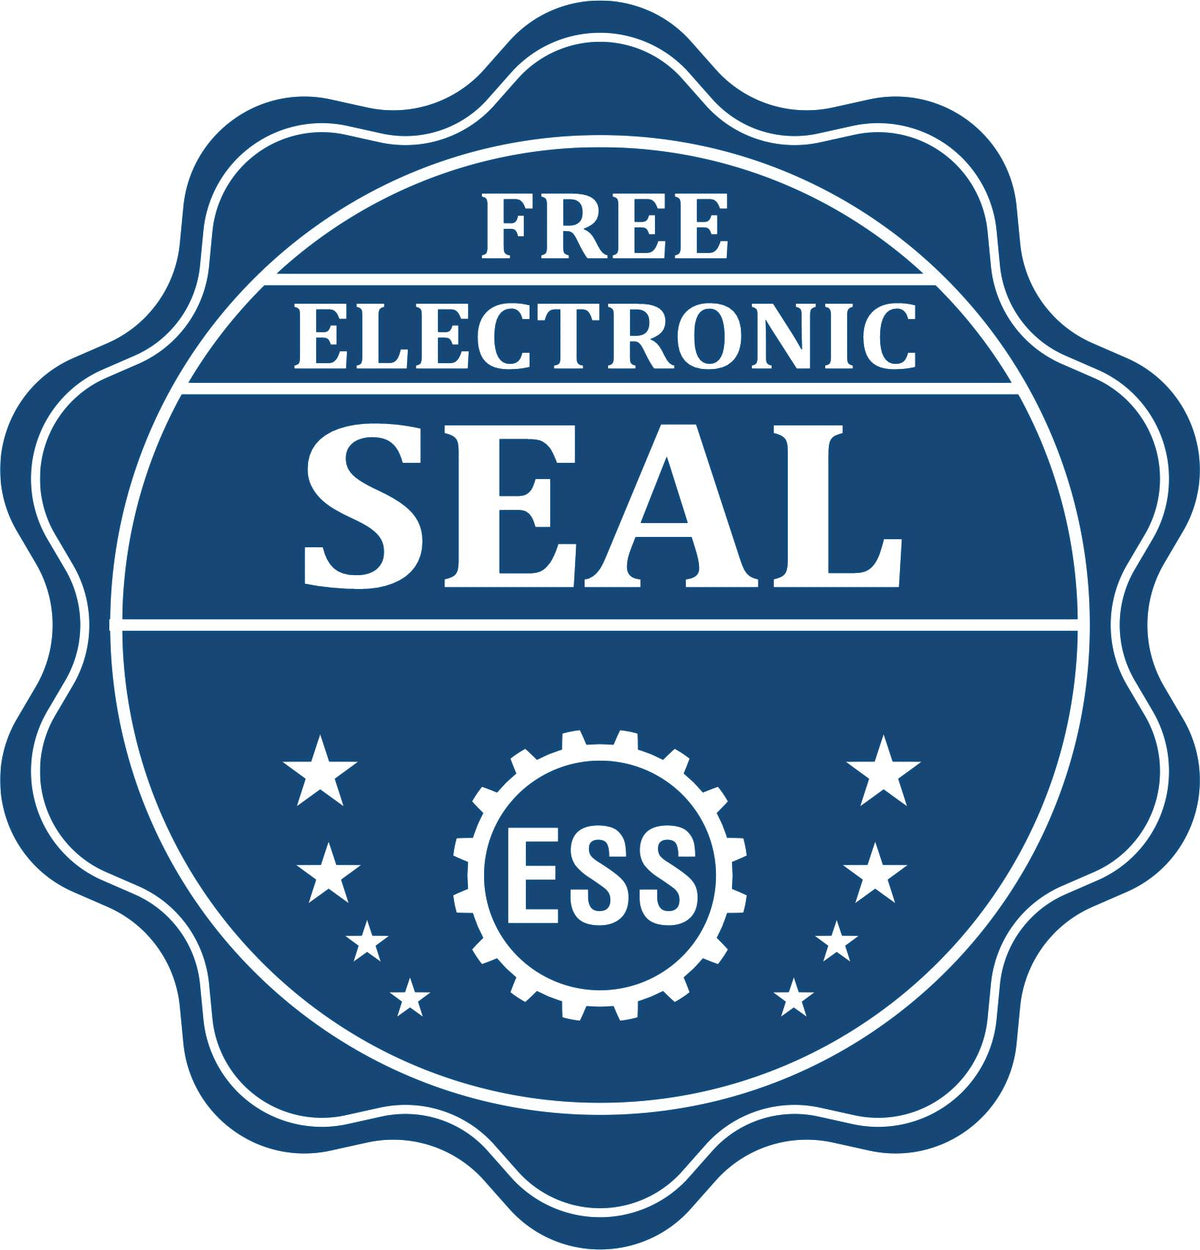 A badge showing a free electronic seal for the Premium MaxLight Pre-Inked Rhode Is Landscape Architects Stamp with stars and the ESS gear on the emblem.